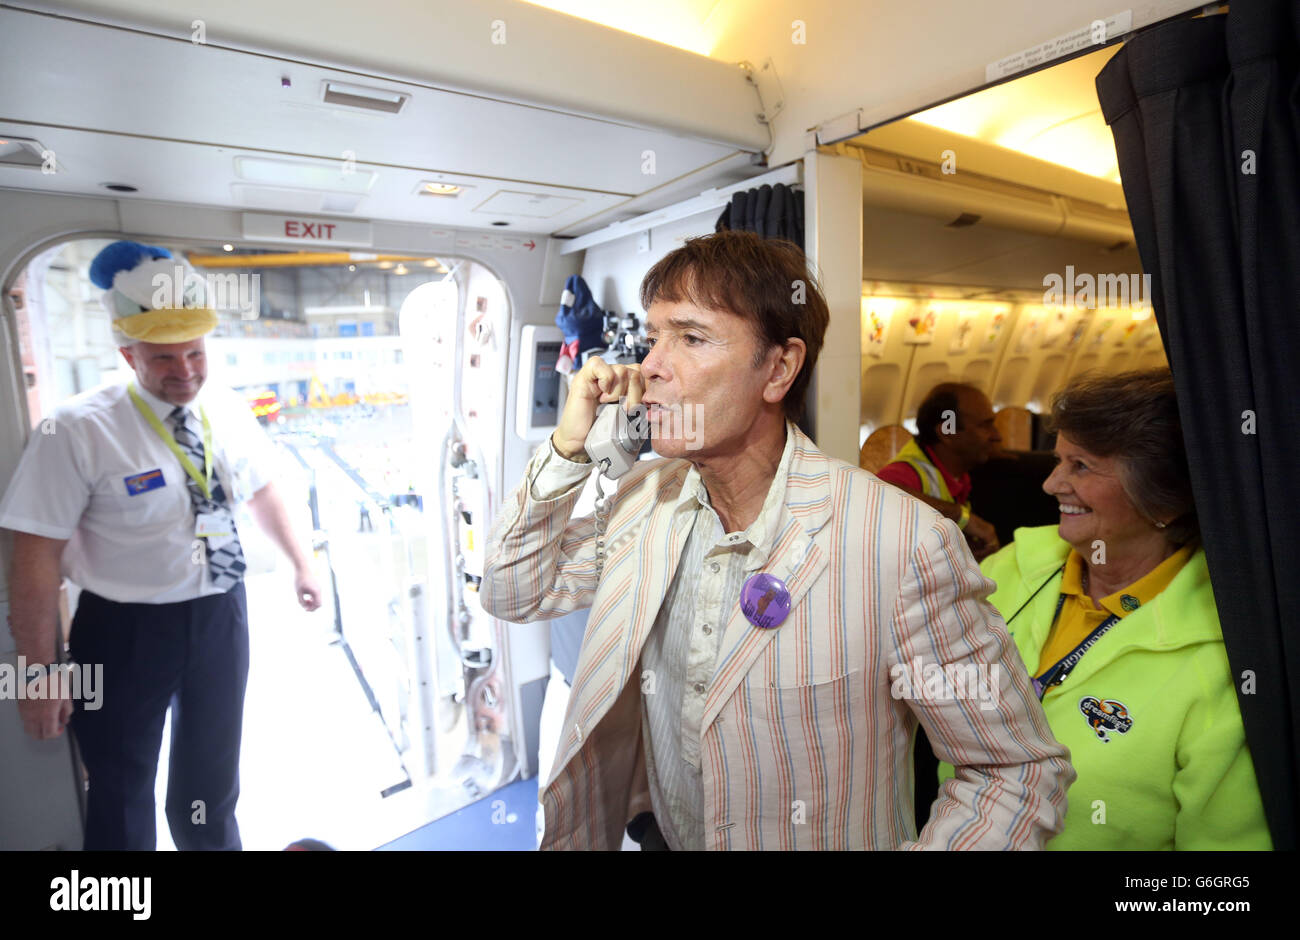 Sir Cliff Richard performs a revised version of his song Summer Holiday over the PA system onboard the British Airways Dreamflight plane before it flies to Florida, USA. Stock Photo